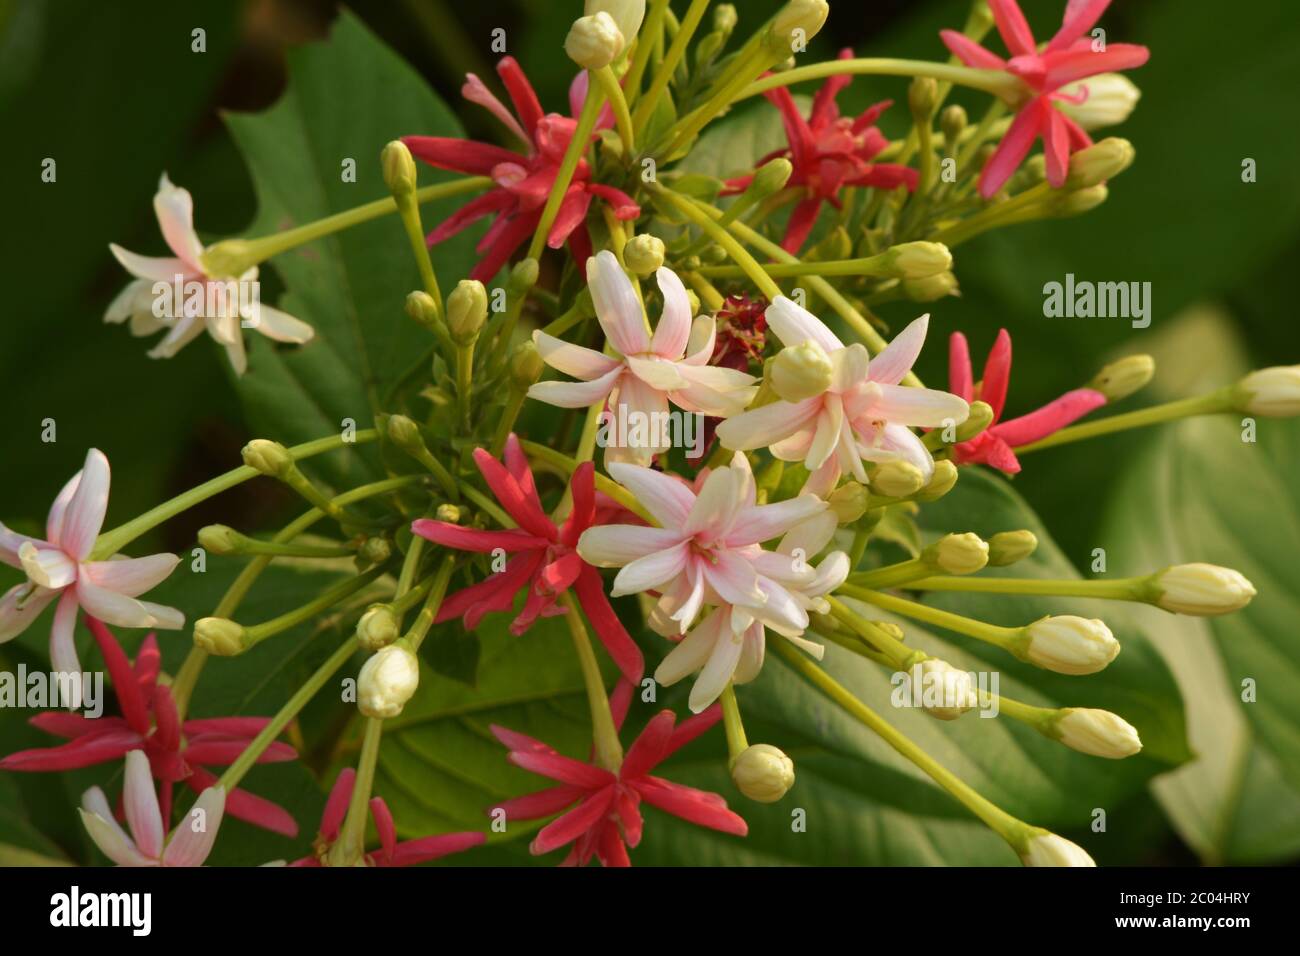 Drunken sailor, Rangoon creeper, Chinese honeysuckle or Combretum indicum, is a vine with red flower clusters and native to tropical Asia. Stock Photo